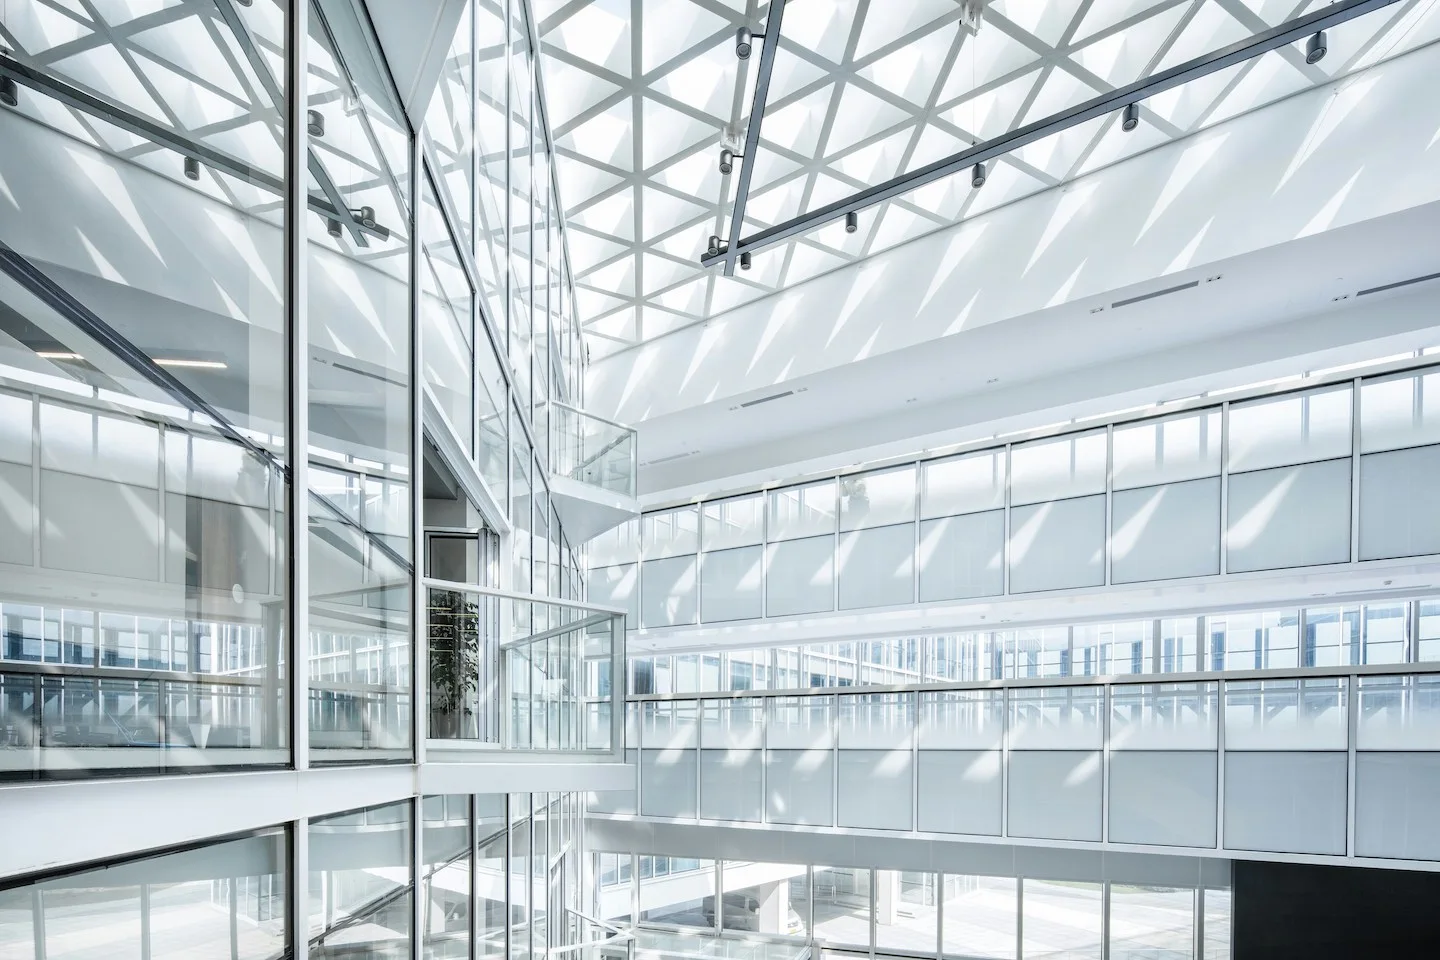 Large office building with glass windows and glass railings.